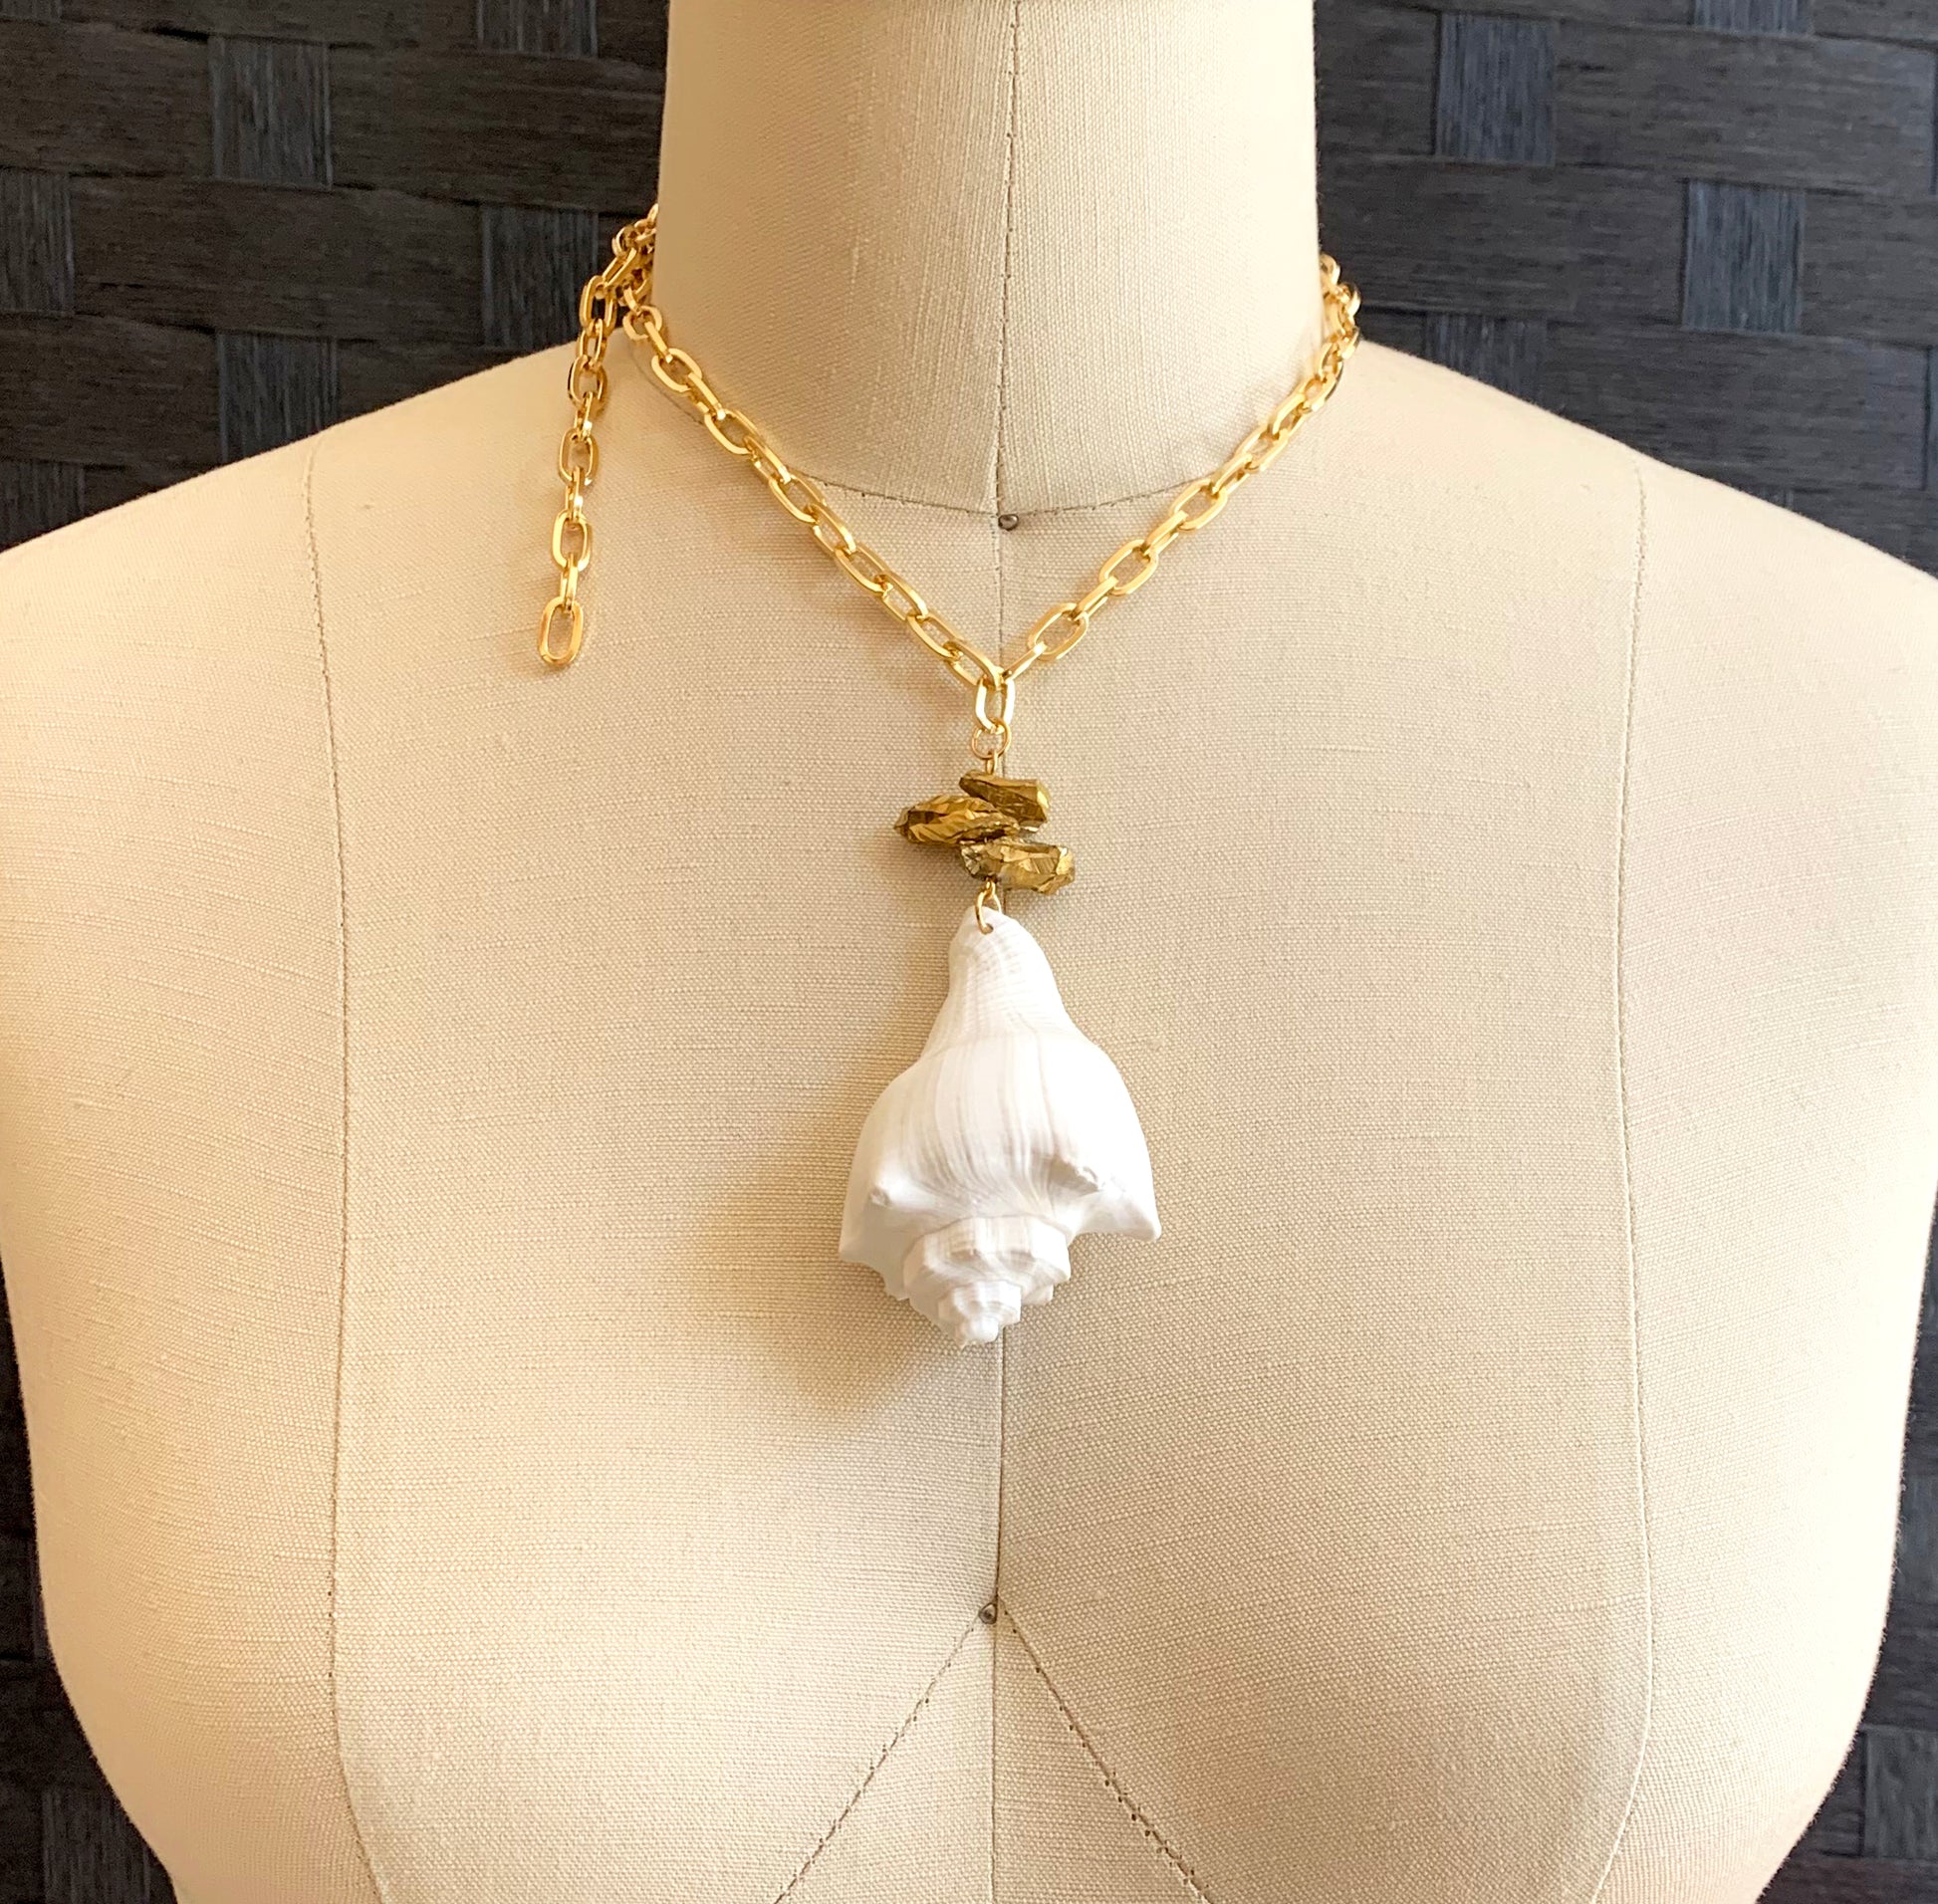 One of a Kind Handmade White Conch Shell Necklace with Gold Quartz Nugget Beads